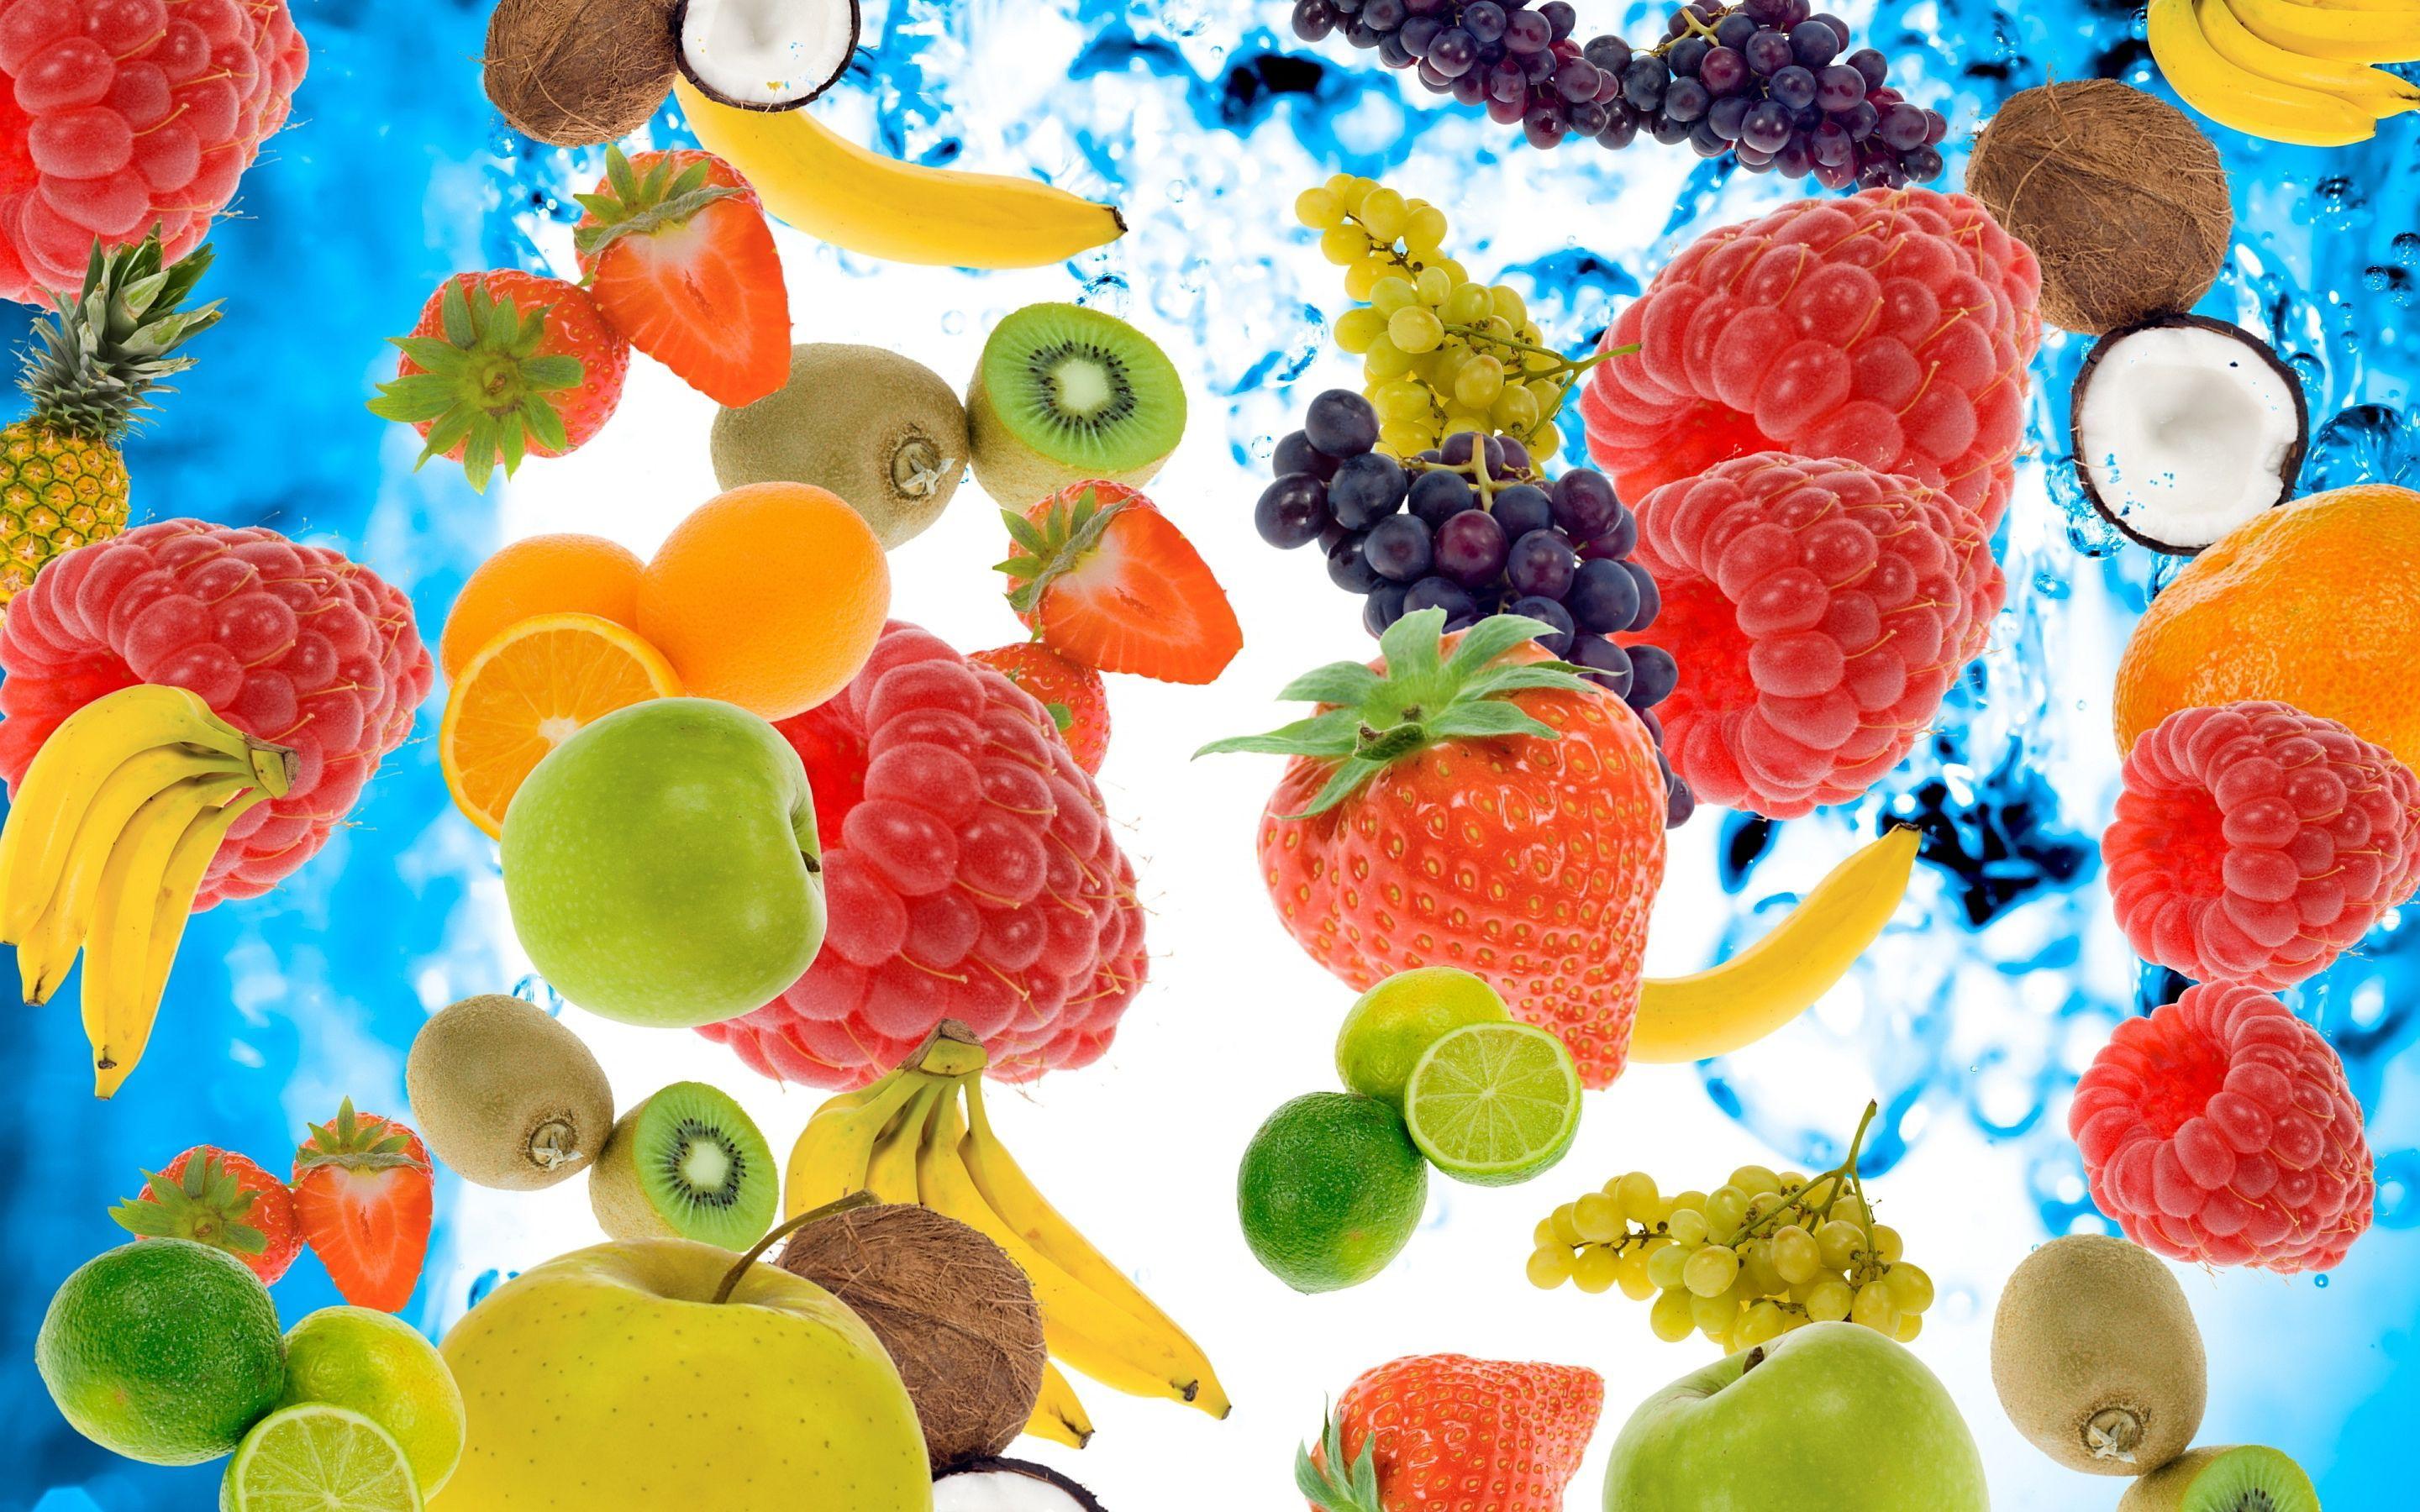 Fruit wallpaper. Fruit wallpaper, Fruits image, Fruit infused water